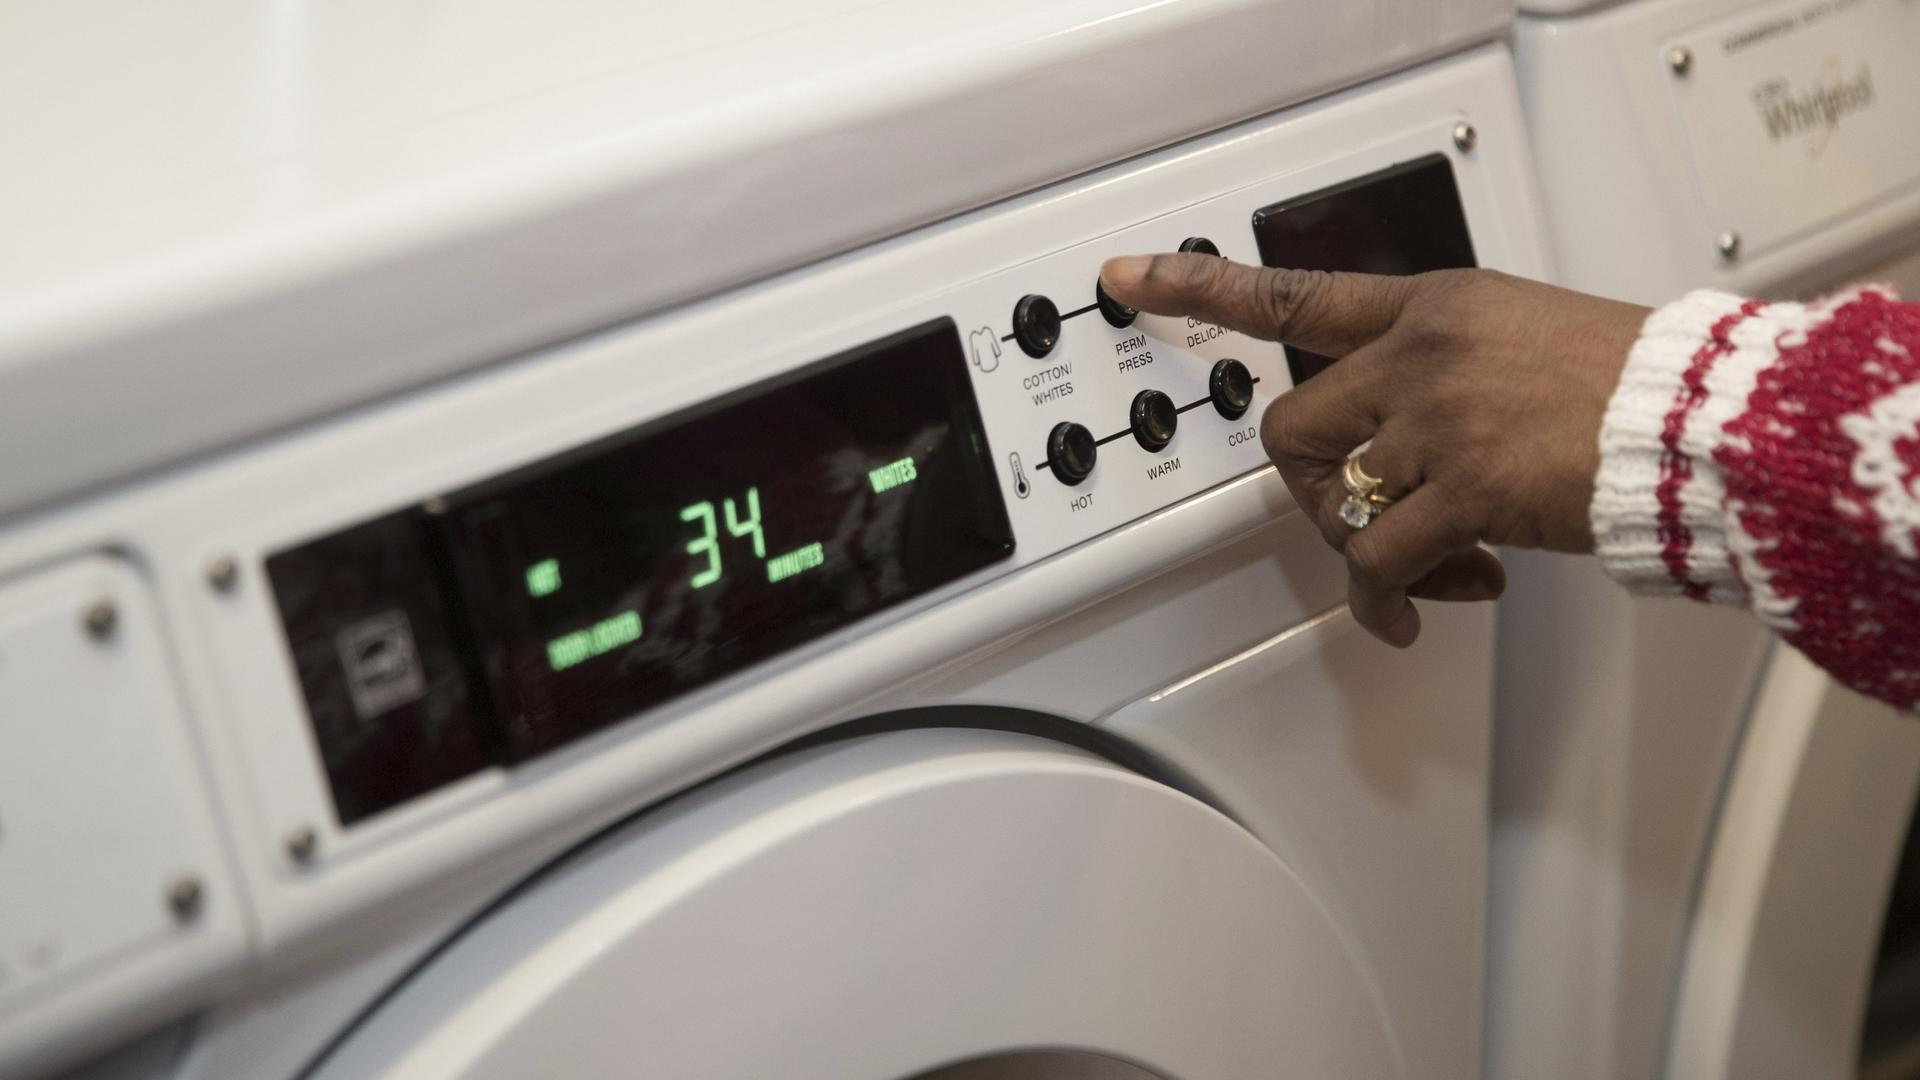 Hand reaching forward to set the timer on a washing machine